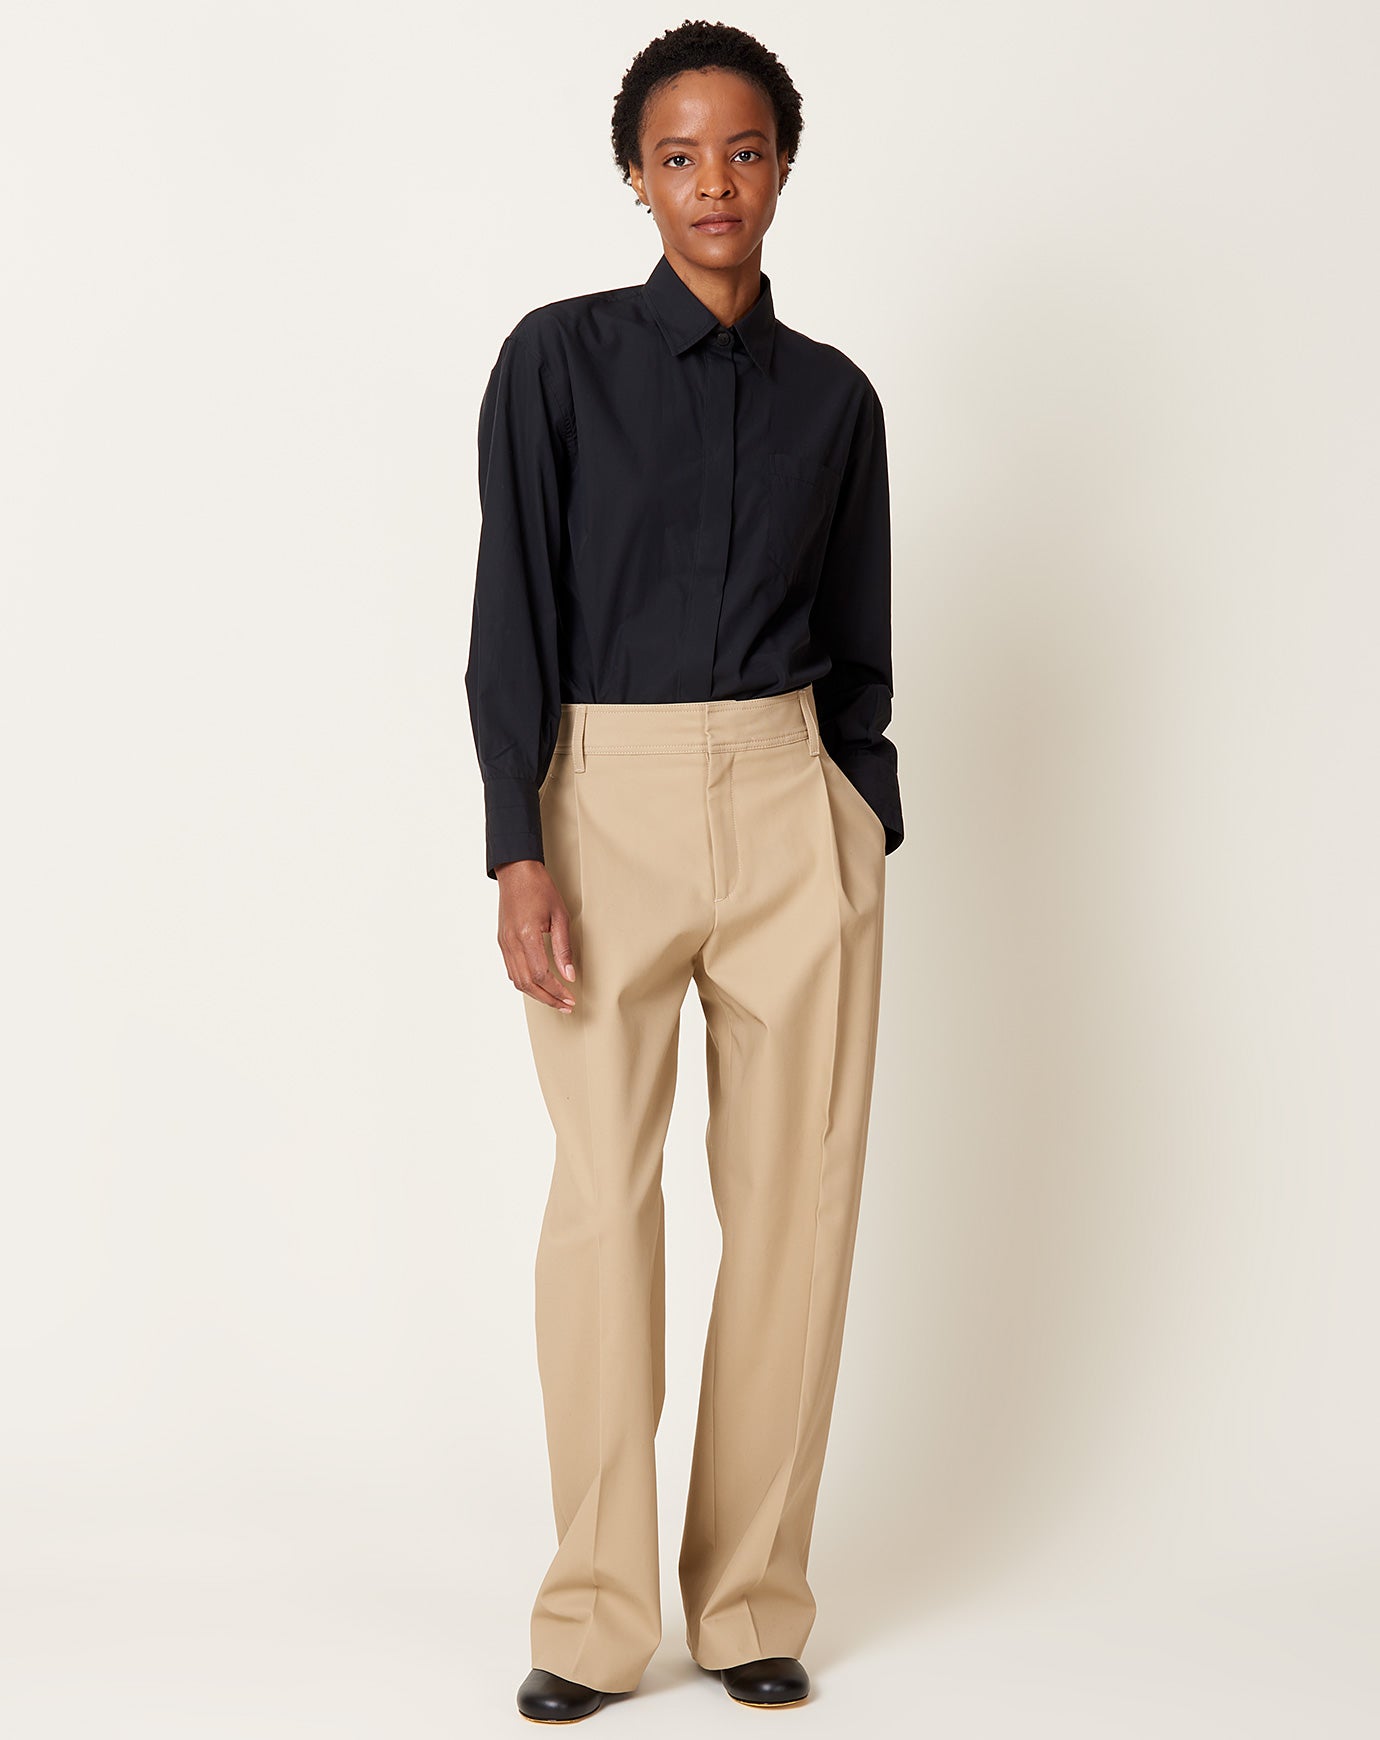 High Waisted Pleat Front Pant in Medium Heather Grey – Maria McManus